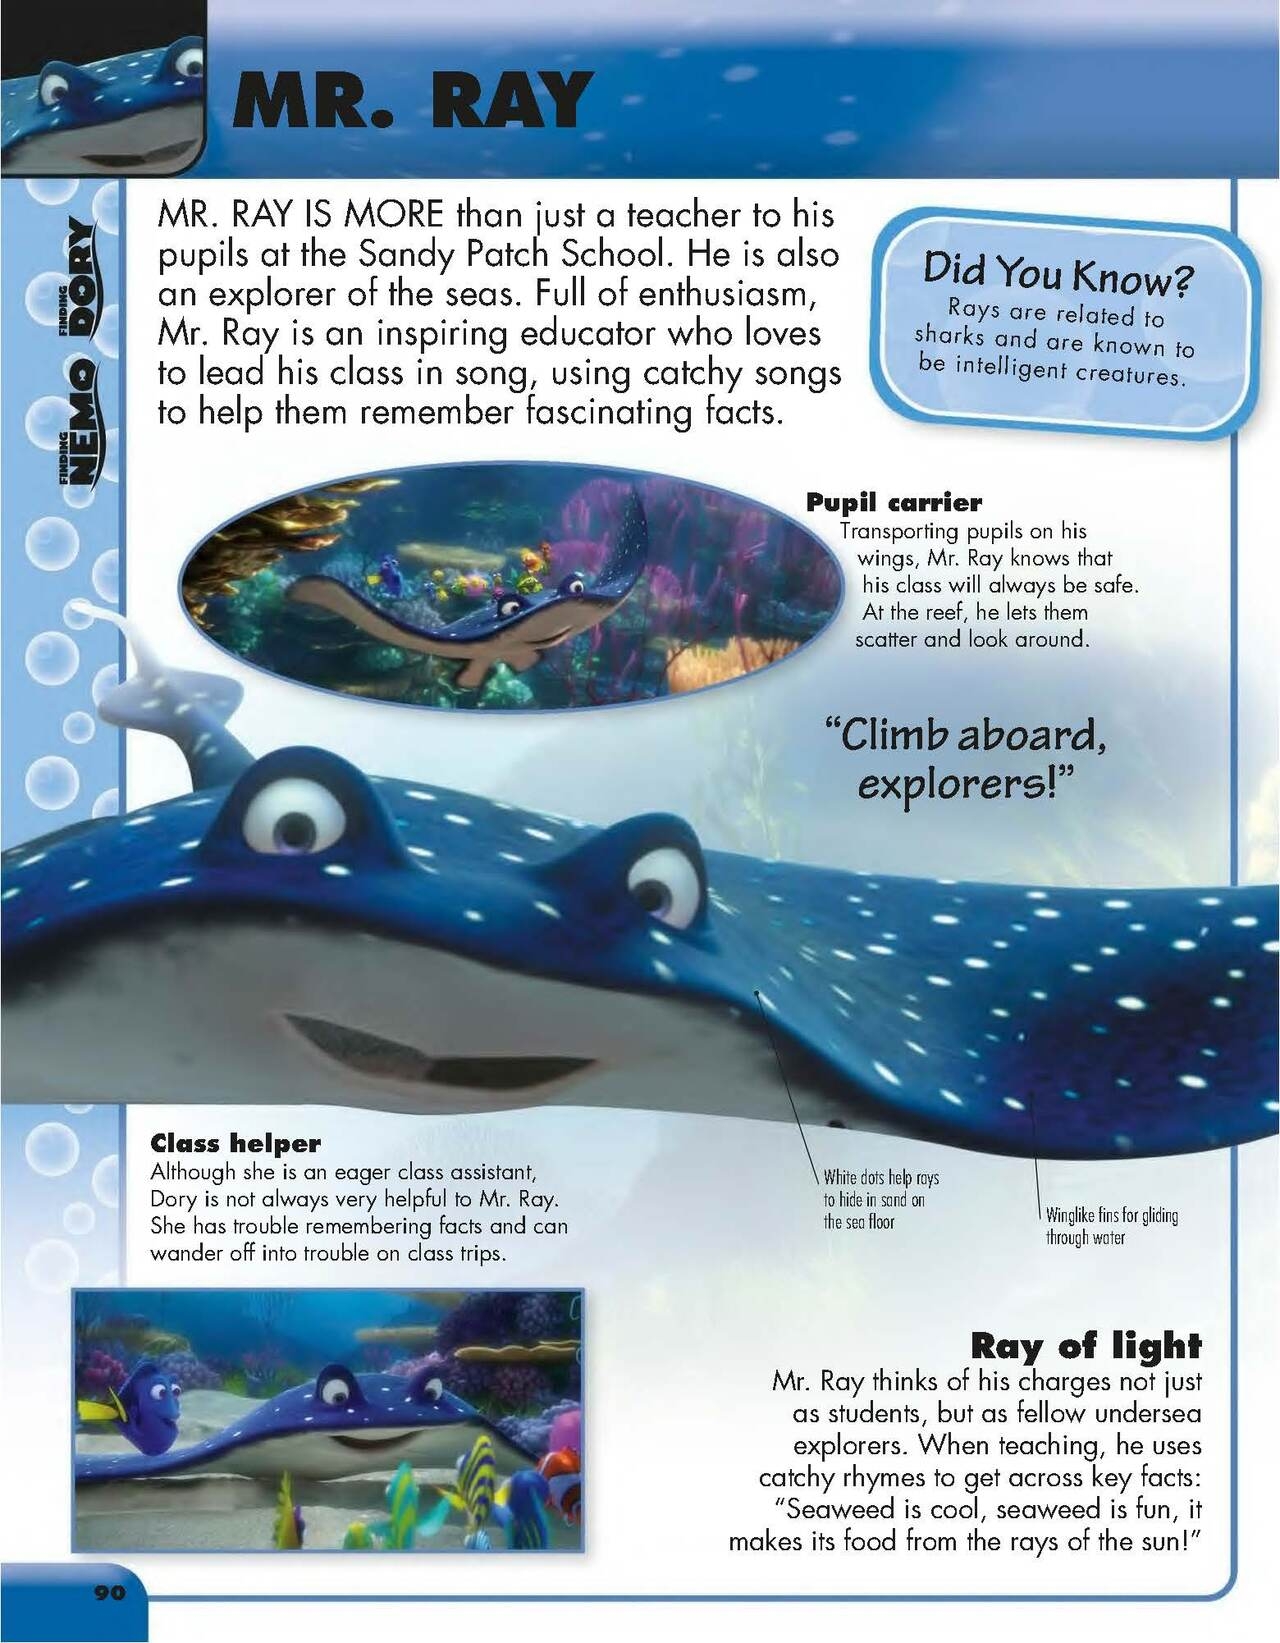 Disney Pixar Character Encyclopedia Updated and Expanded 91